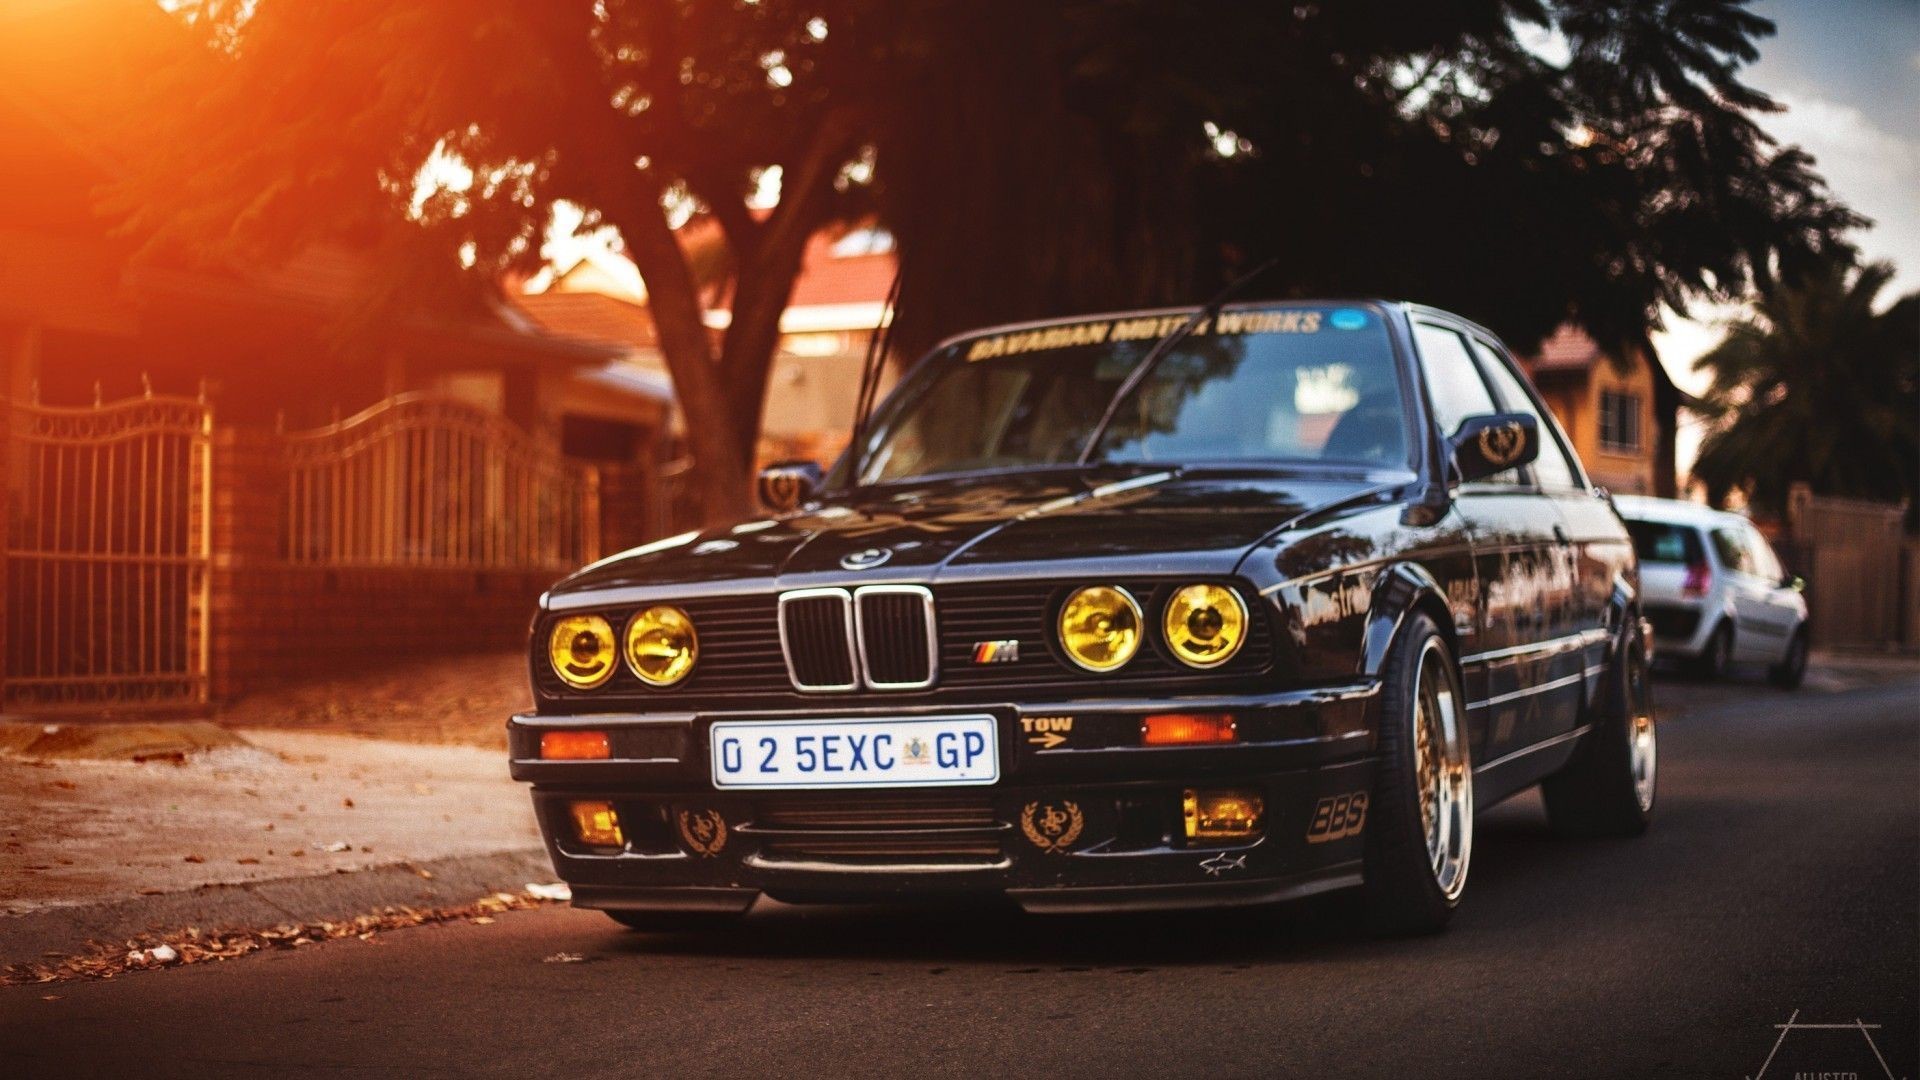 1920x1080 Bmw E30 Wallpapers Wallpaper Cave - HD Wallpapers